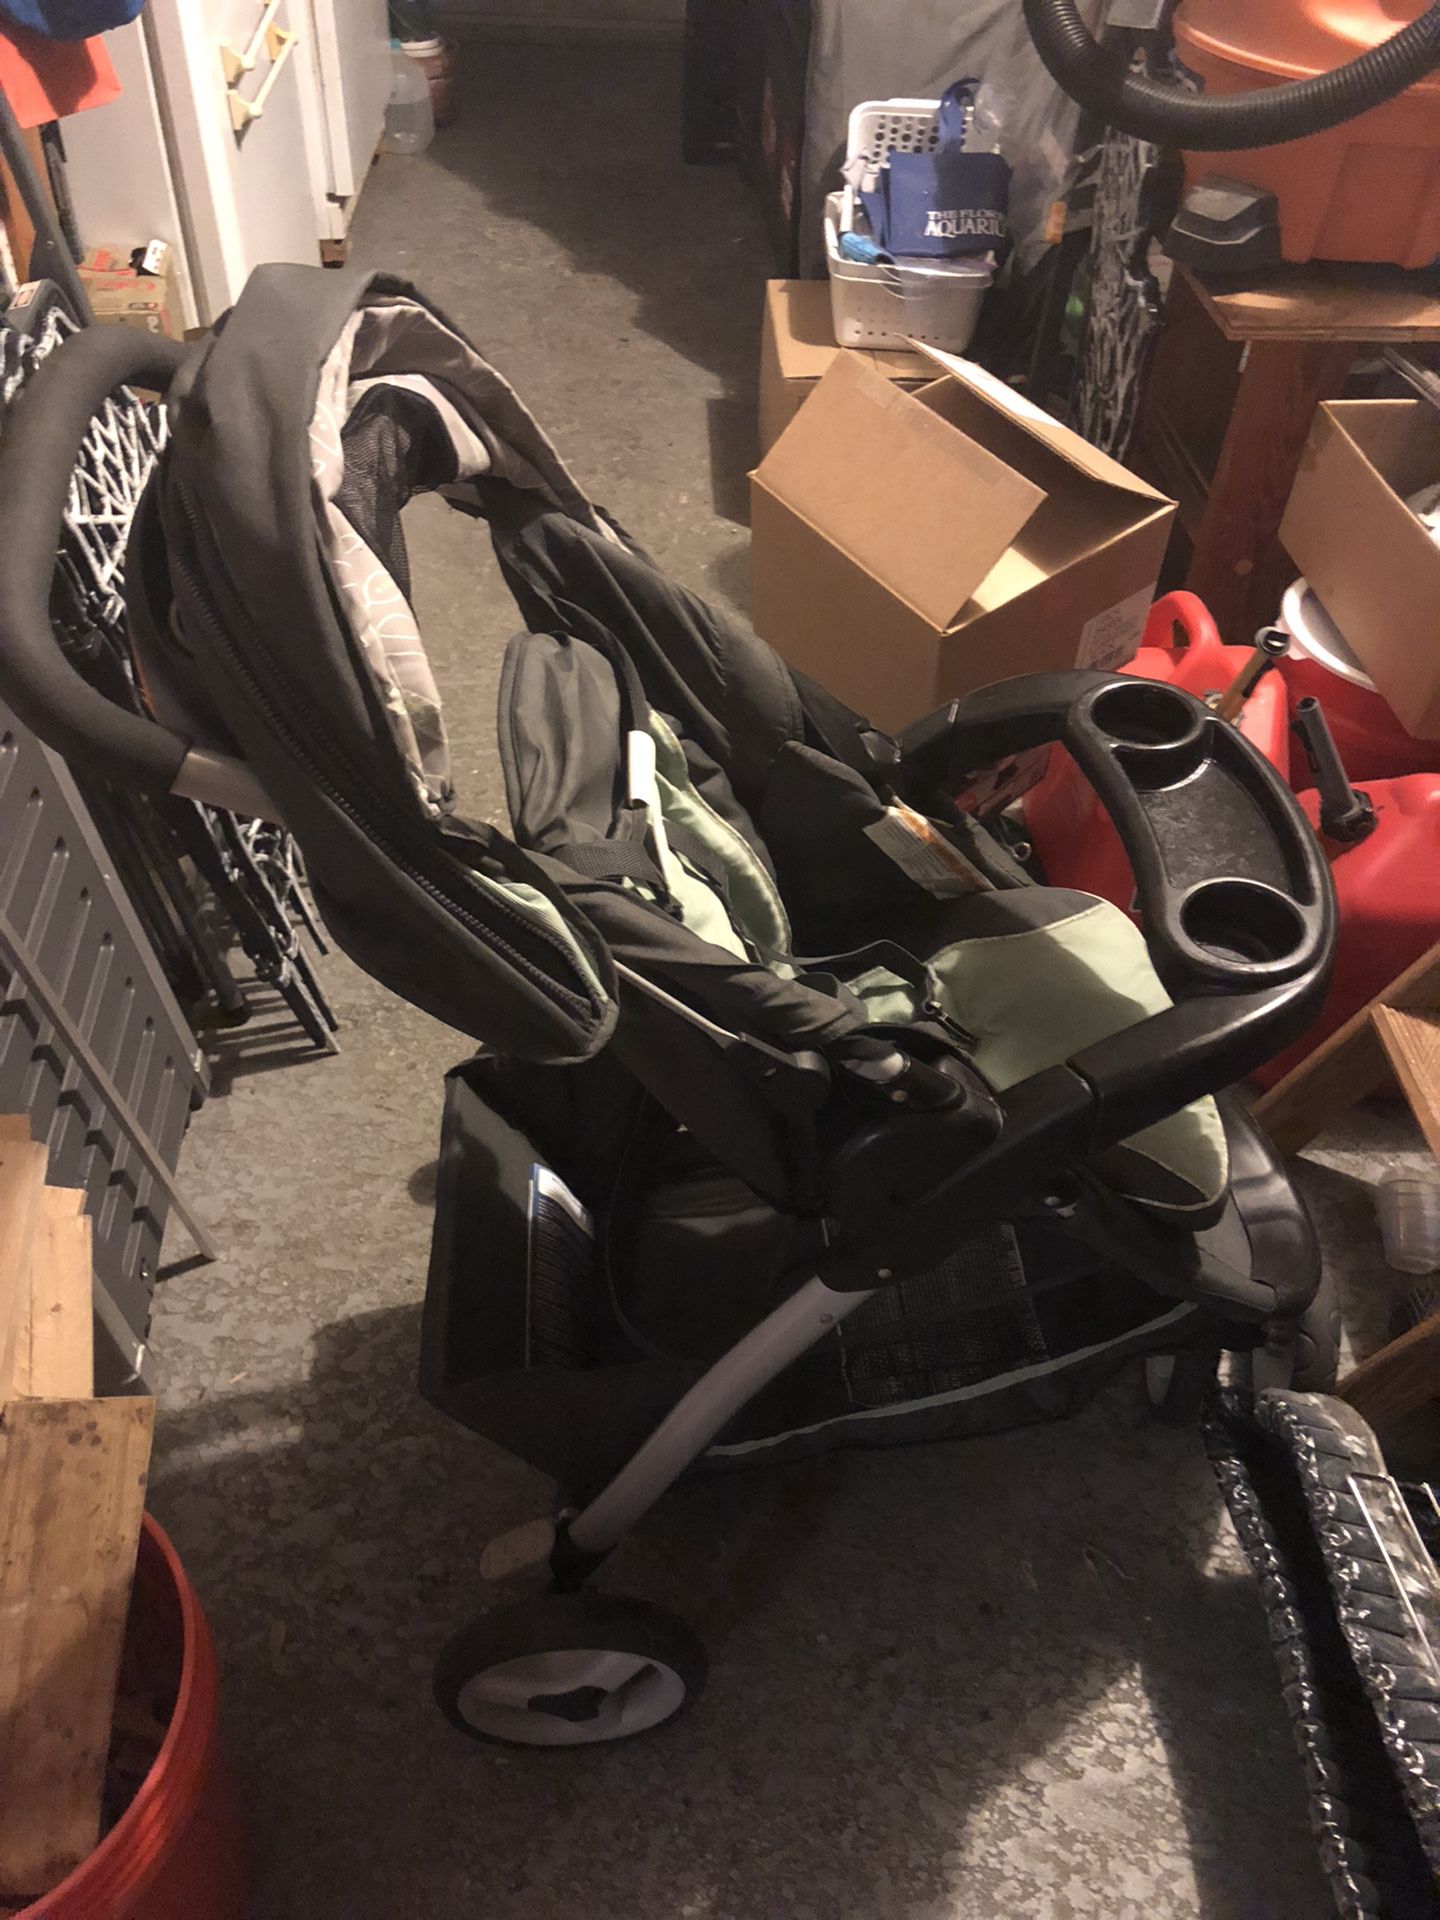 Baby stroller with baby car seat level and car seat